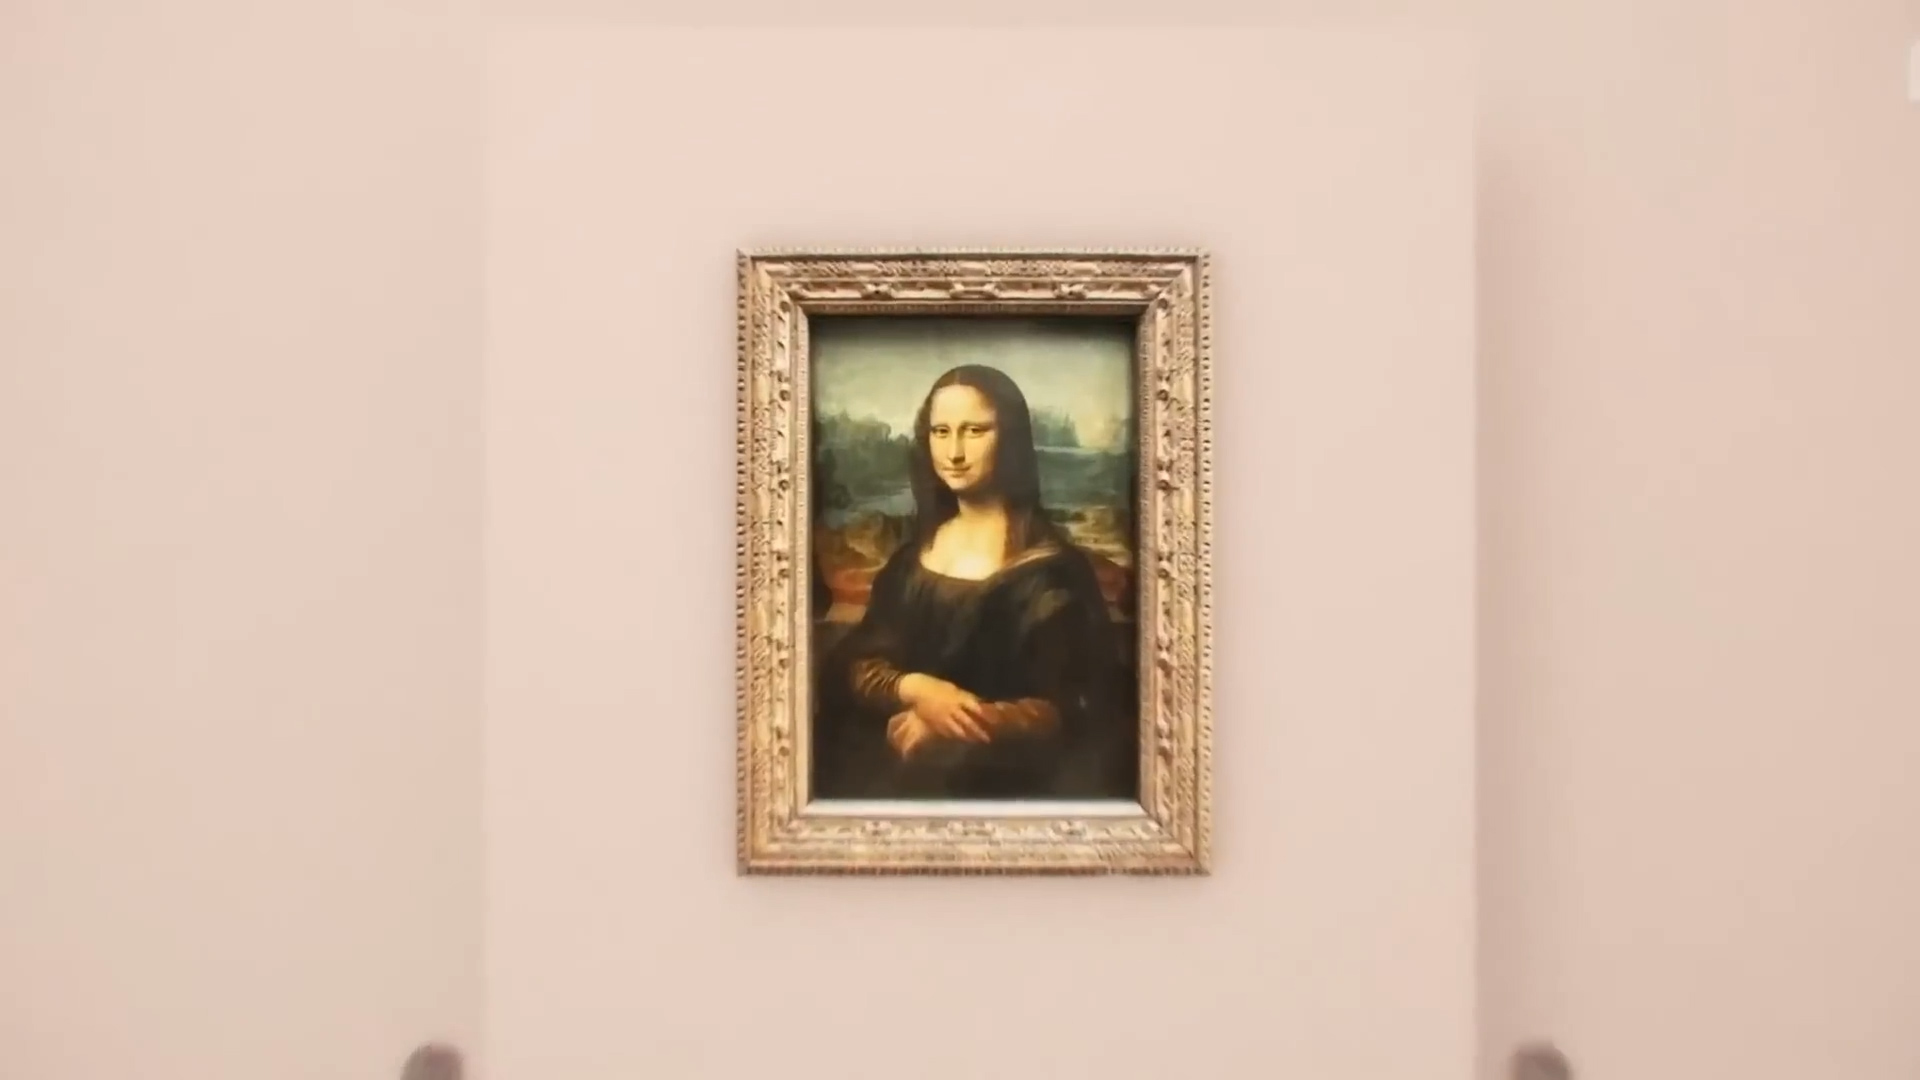 Why is the Mona Lisa the most famous painting in the world? How much is the Mona Lisa painting cost? Do you know 5 facts about Mona Lisa painting?